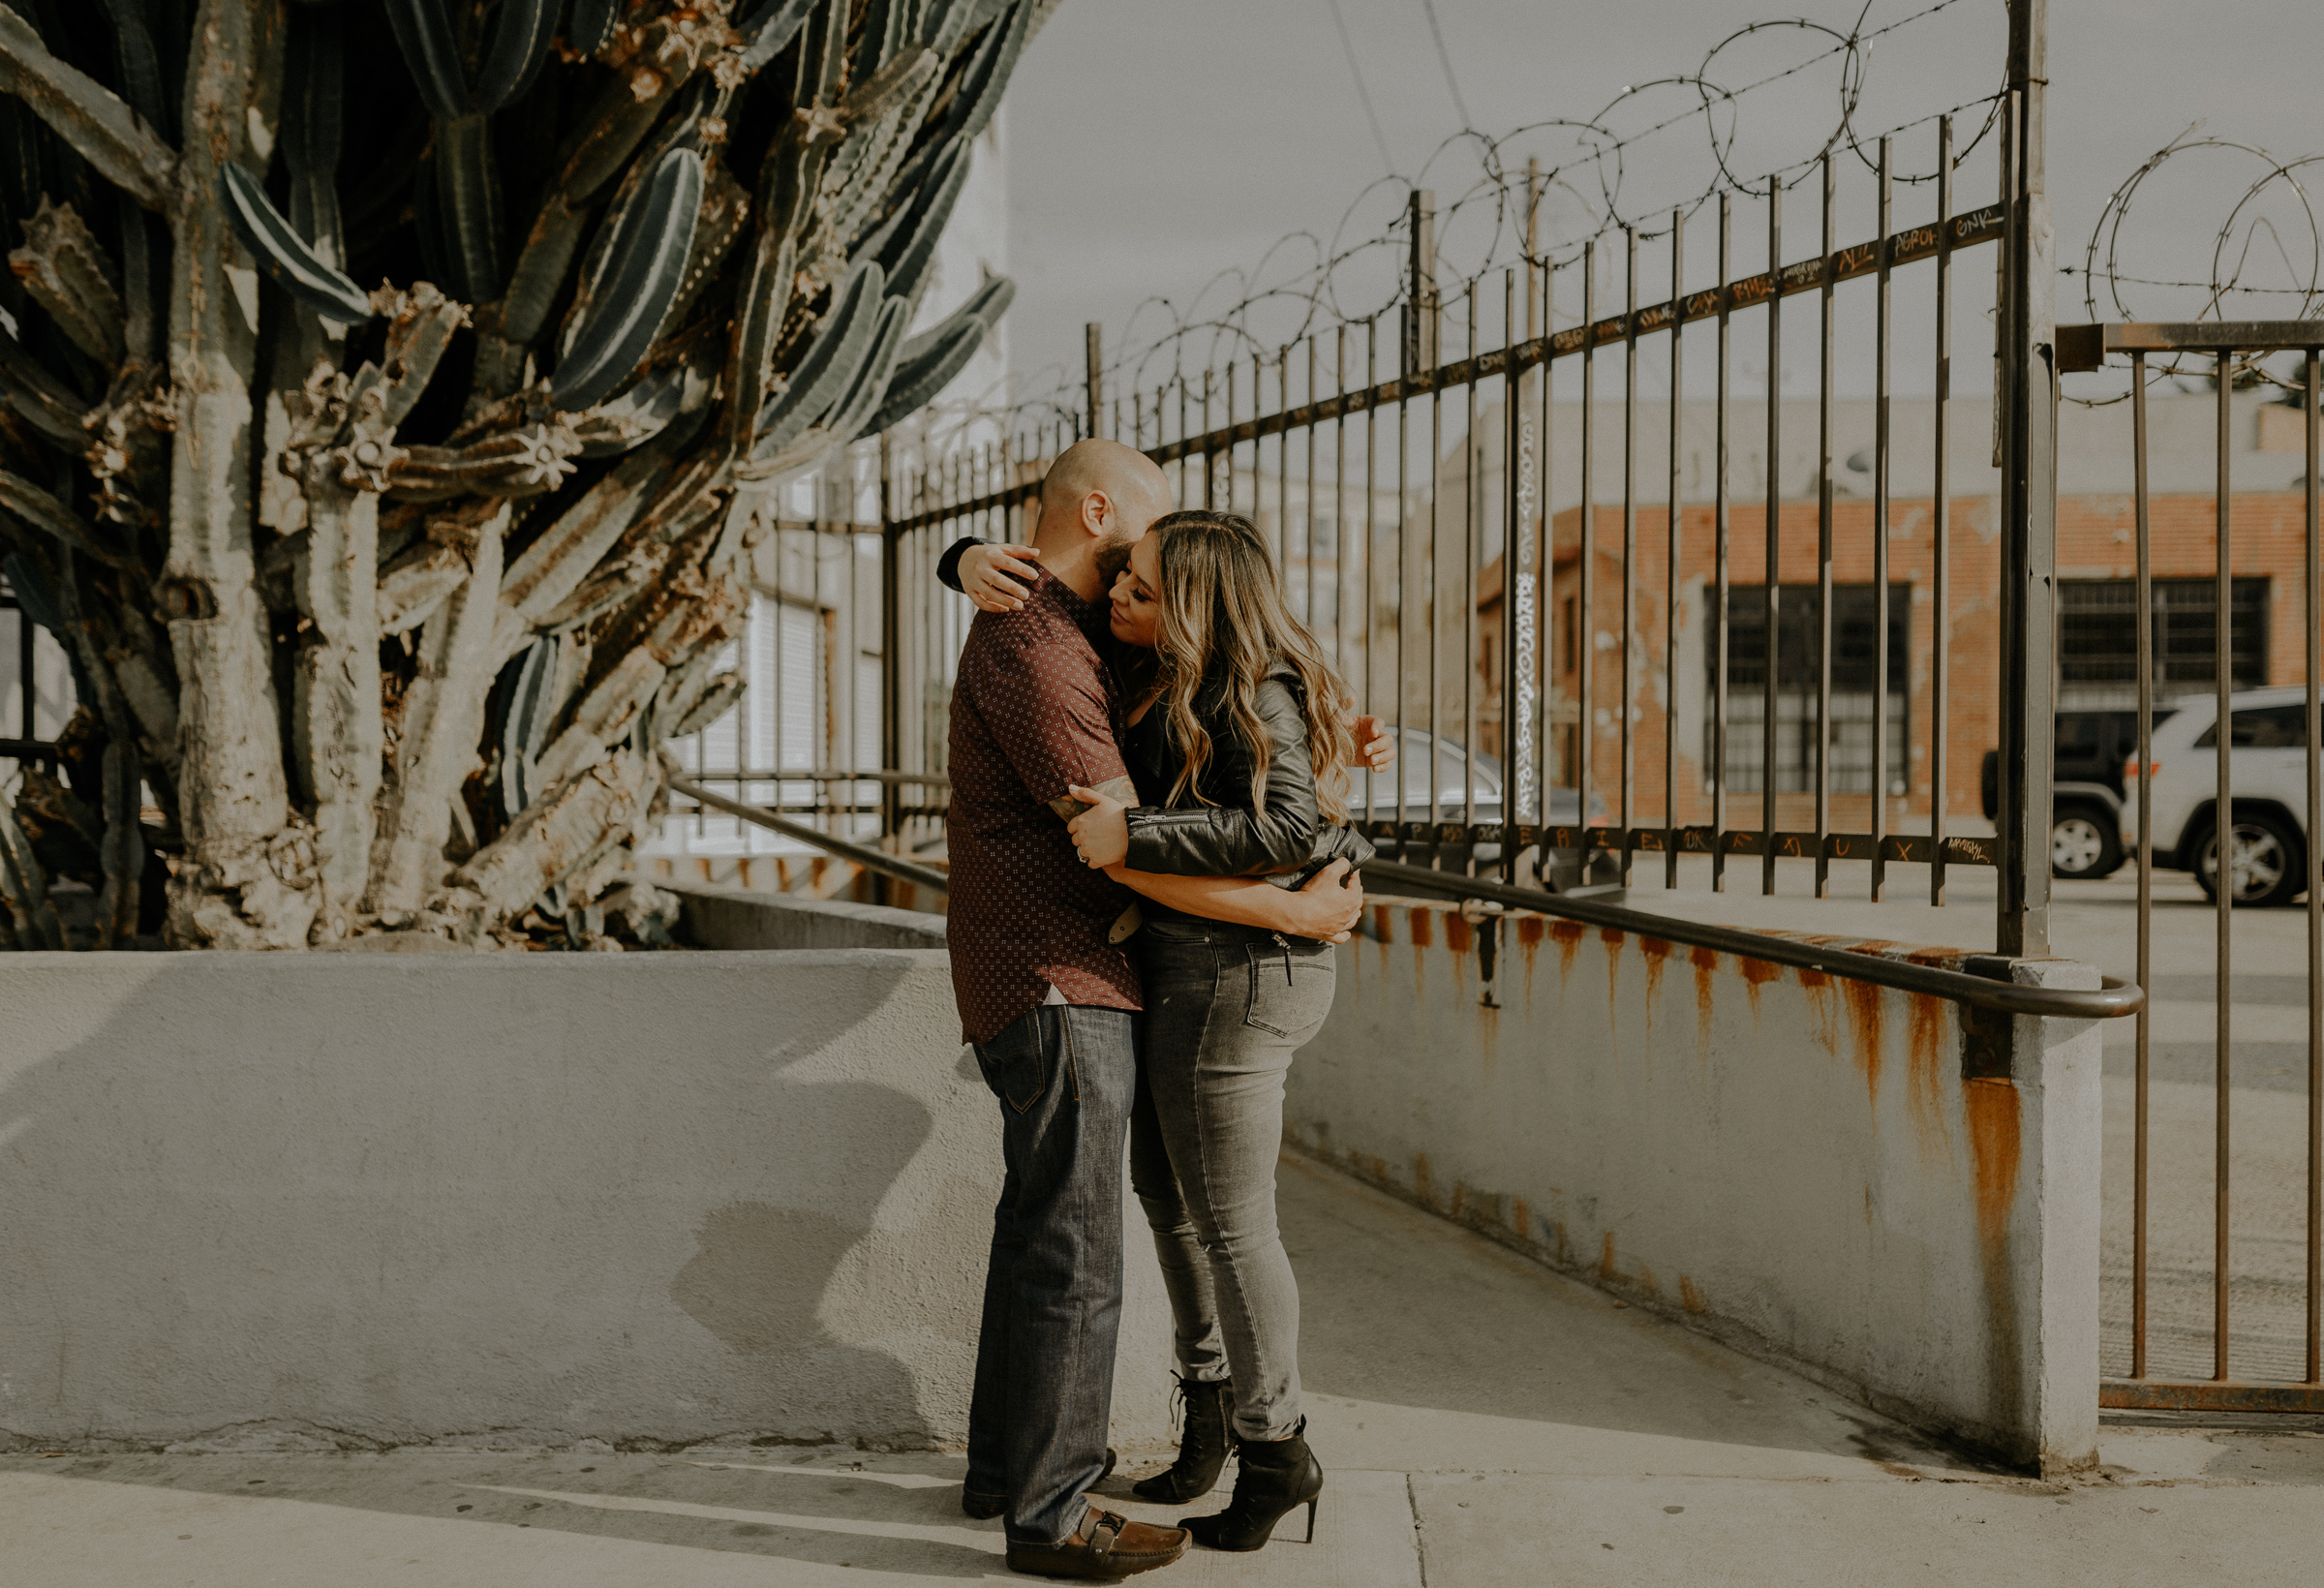 Isaiah + Taylor Photography - Los Angeles Wedding Photographer - DTLA Arts District  Engagement Session  003.jpg